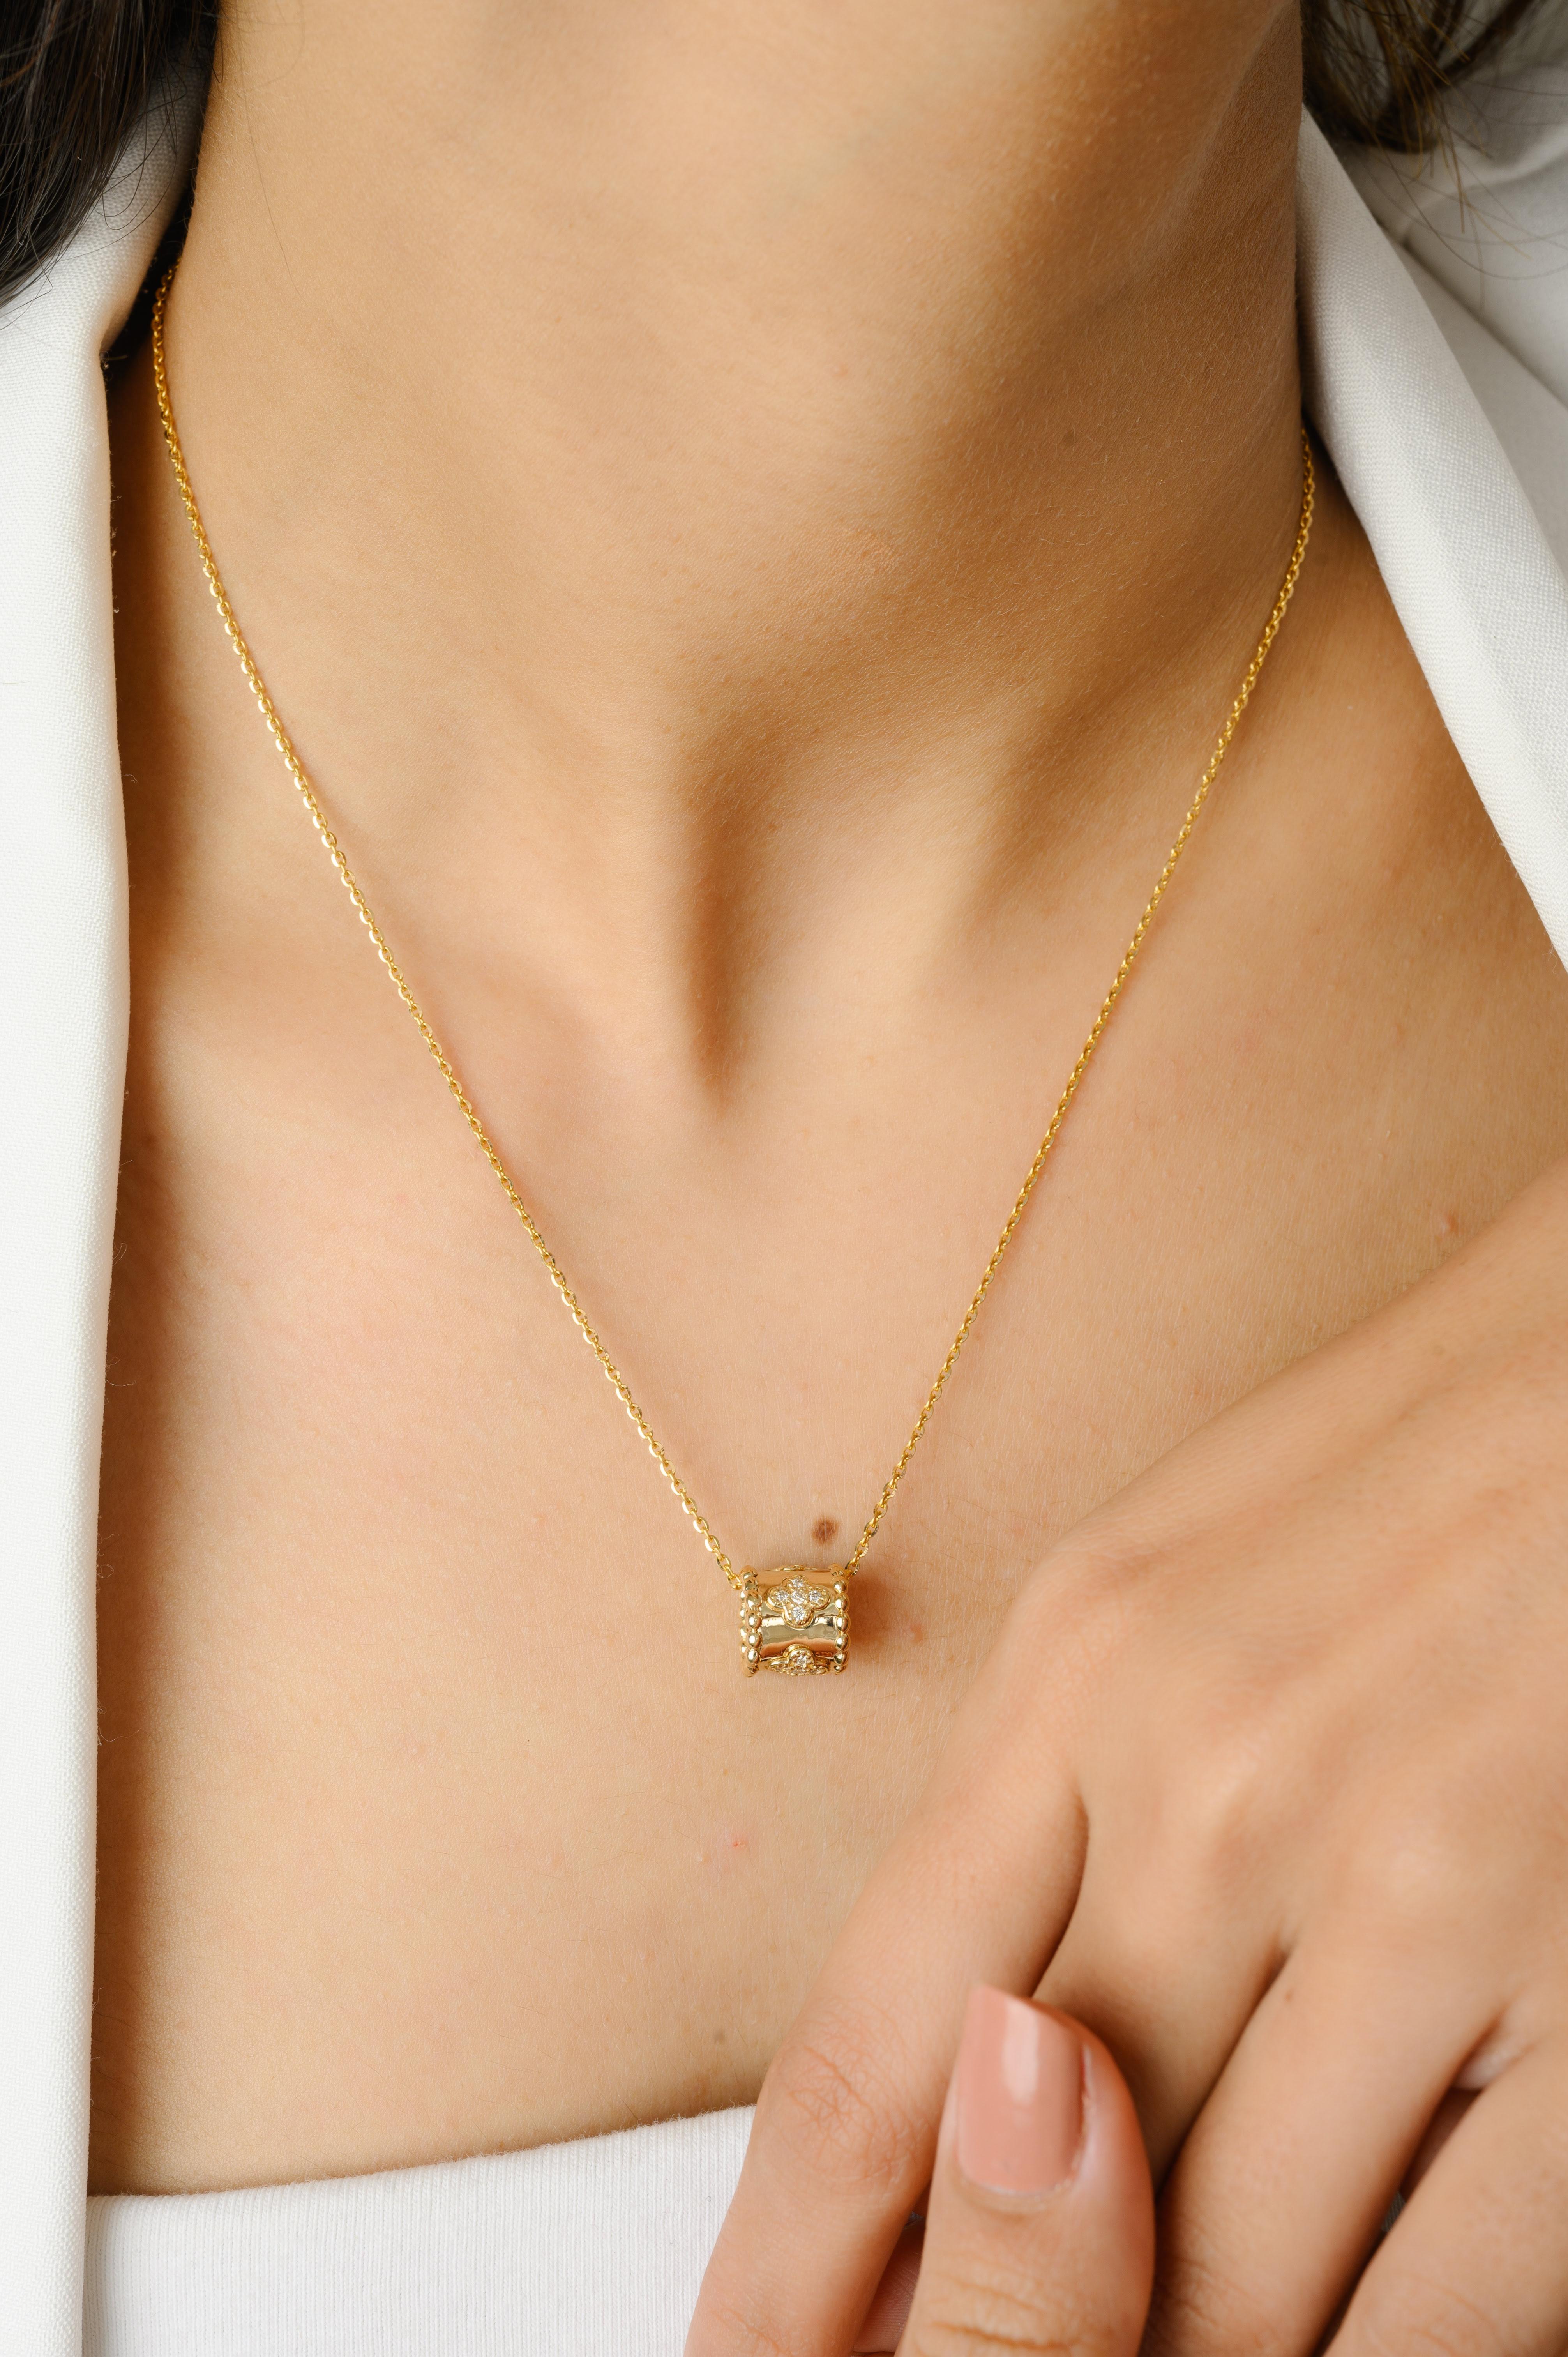 Diamond Clover Roller Pendant Chain Necklace in 14K gold studded with round cut diamond. This stunning piece of jewelry instantly elevates a casual look or dressy outfit. 
April birthstone diamond brings love, fame, success and prosperity.
Designed